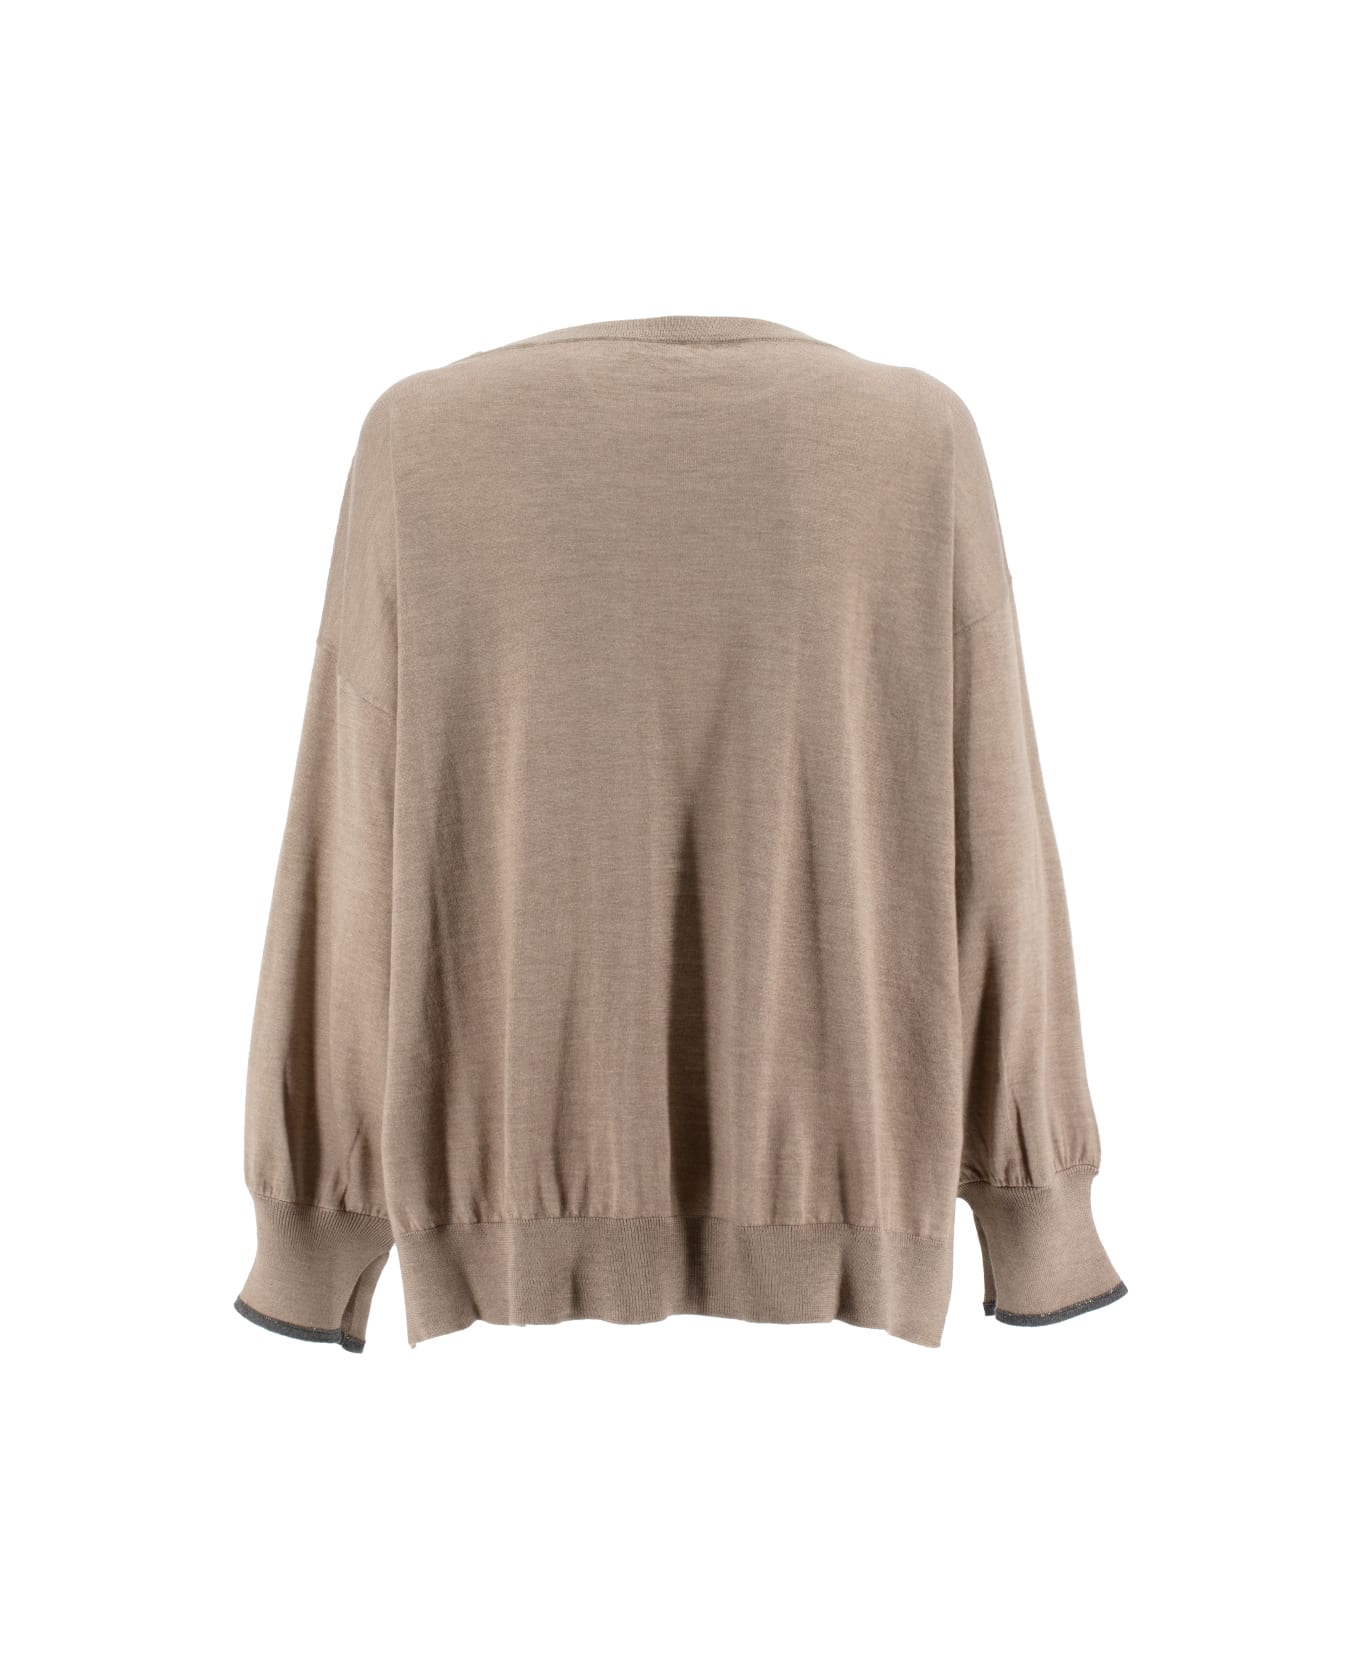 Brunello Cucinelli Cashmere And Silk Knit Sweater - ROPE ニットウェア